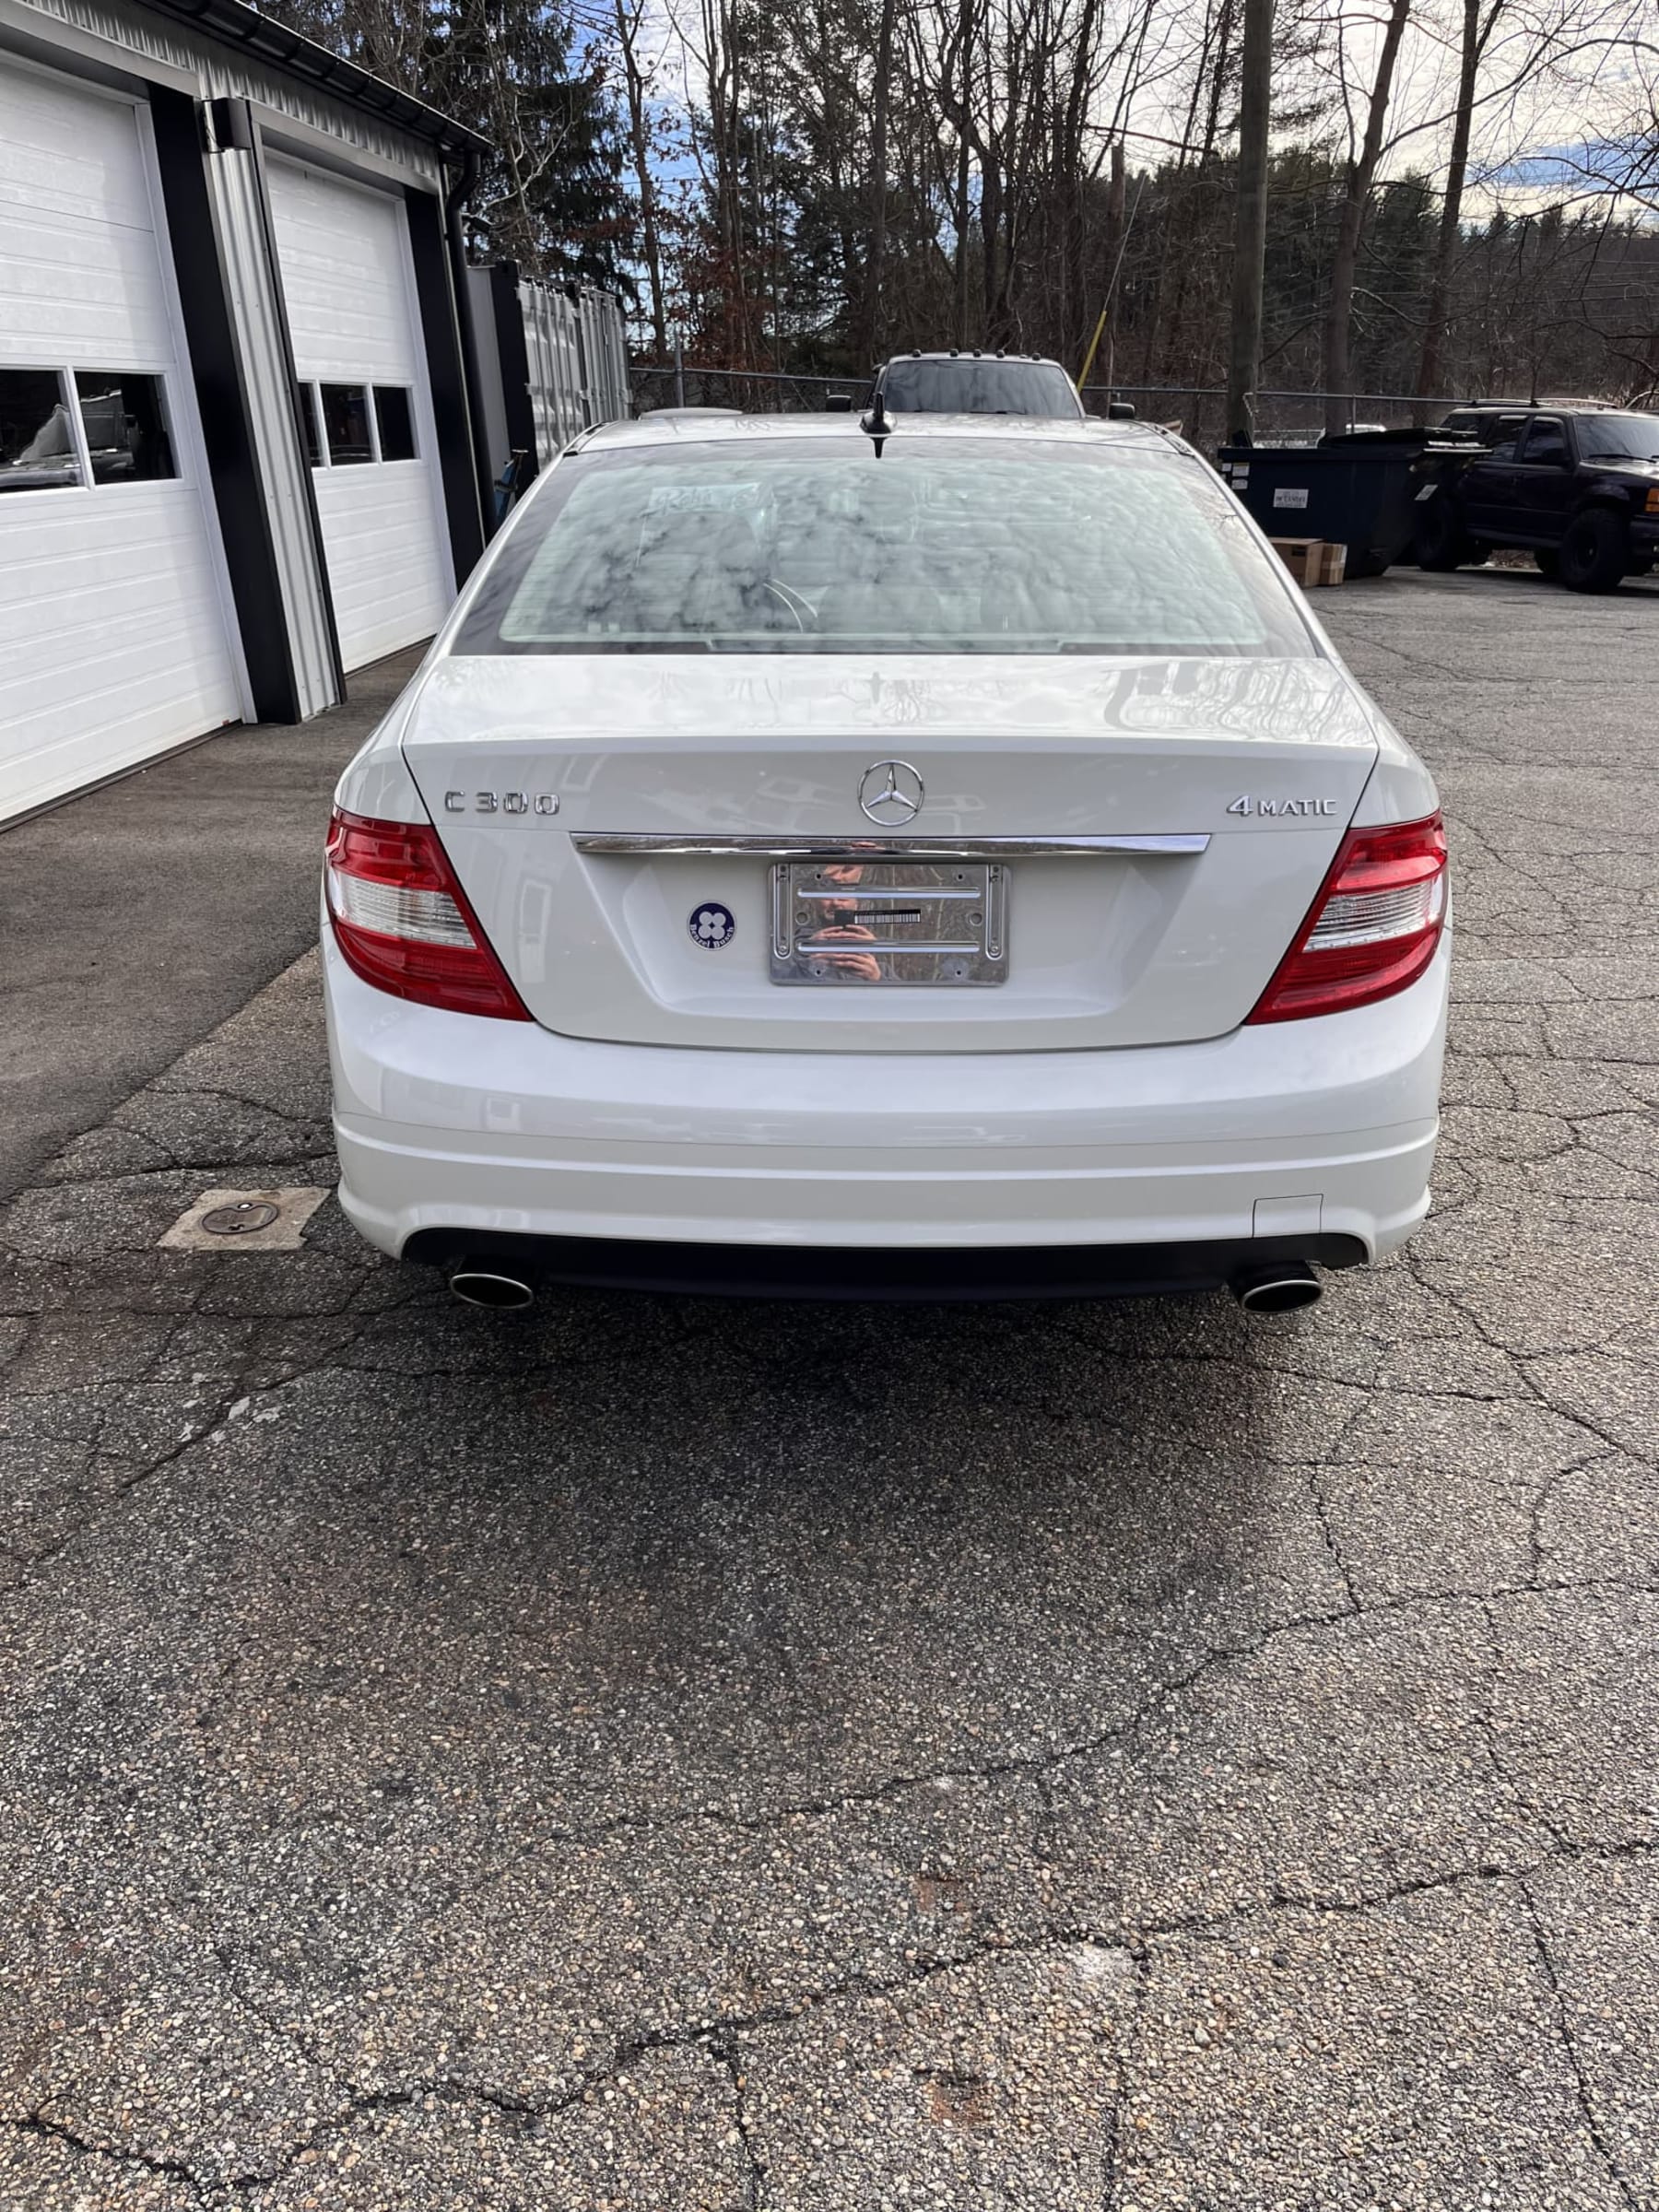 NEW ARRIVAL!! If anyone is looking for a next to new car at used car pricing this is it! One owner car! Mercedes-Benz C300 4Matic!! AWD!! Moonroof, heated leather seats, Bluetooth and much much more! ONLY 21k Miles!! Will not last at $17,900!!